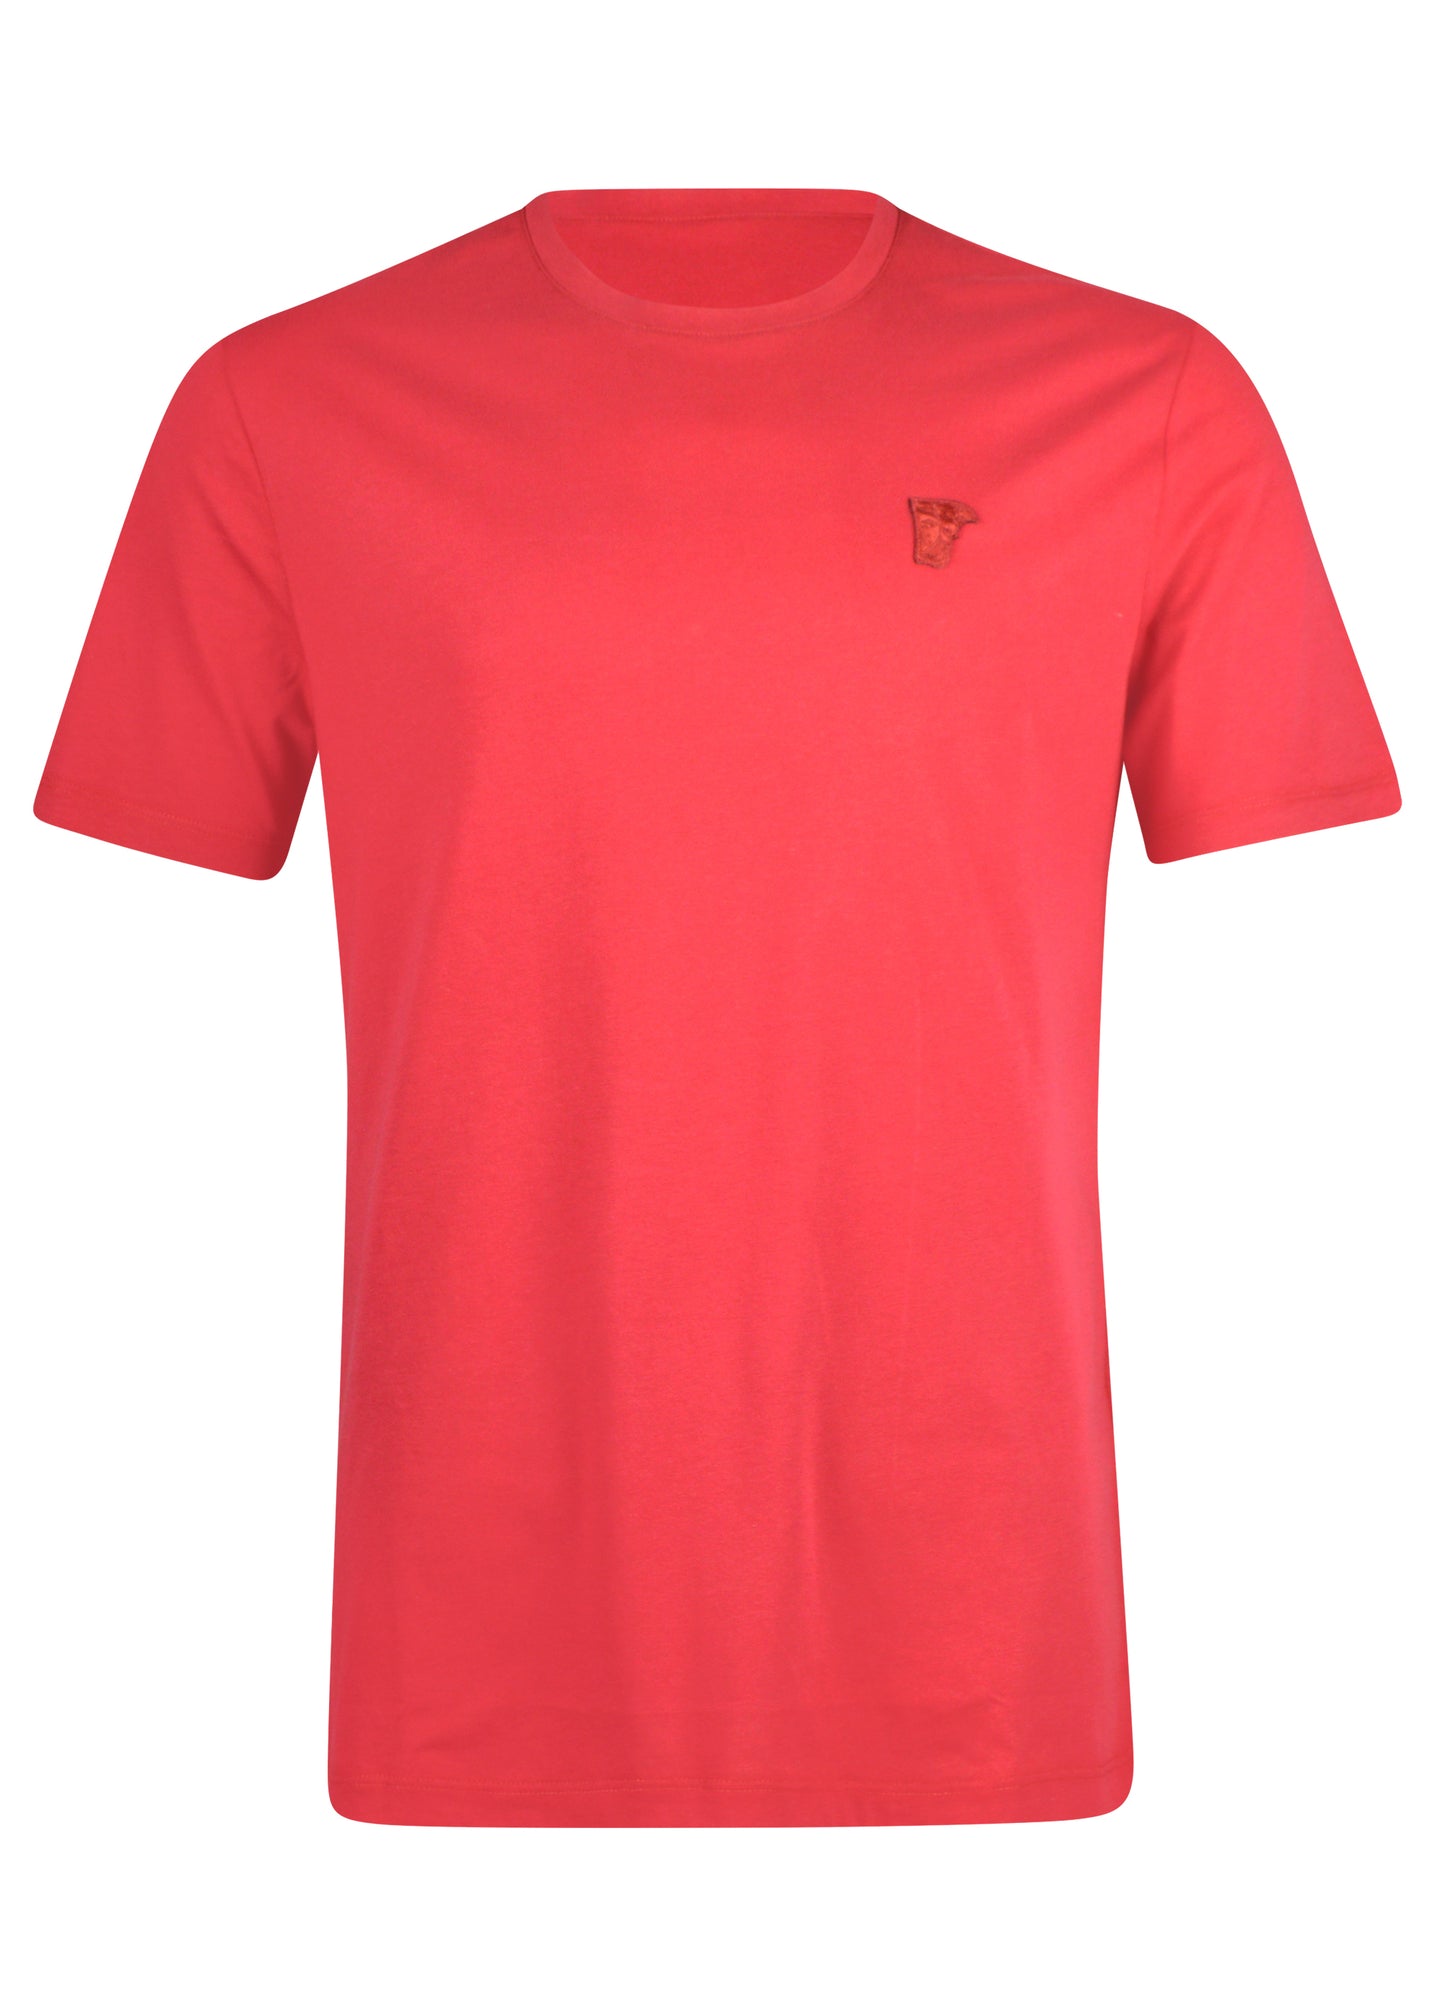 Versace Collection - Classic Iconic Half Medusa Short Sleeve T-Shirt - 097000 - V800683R - Red